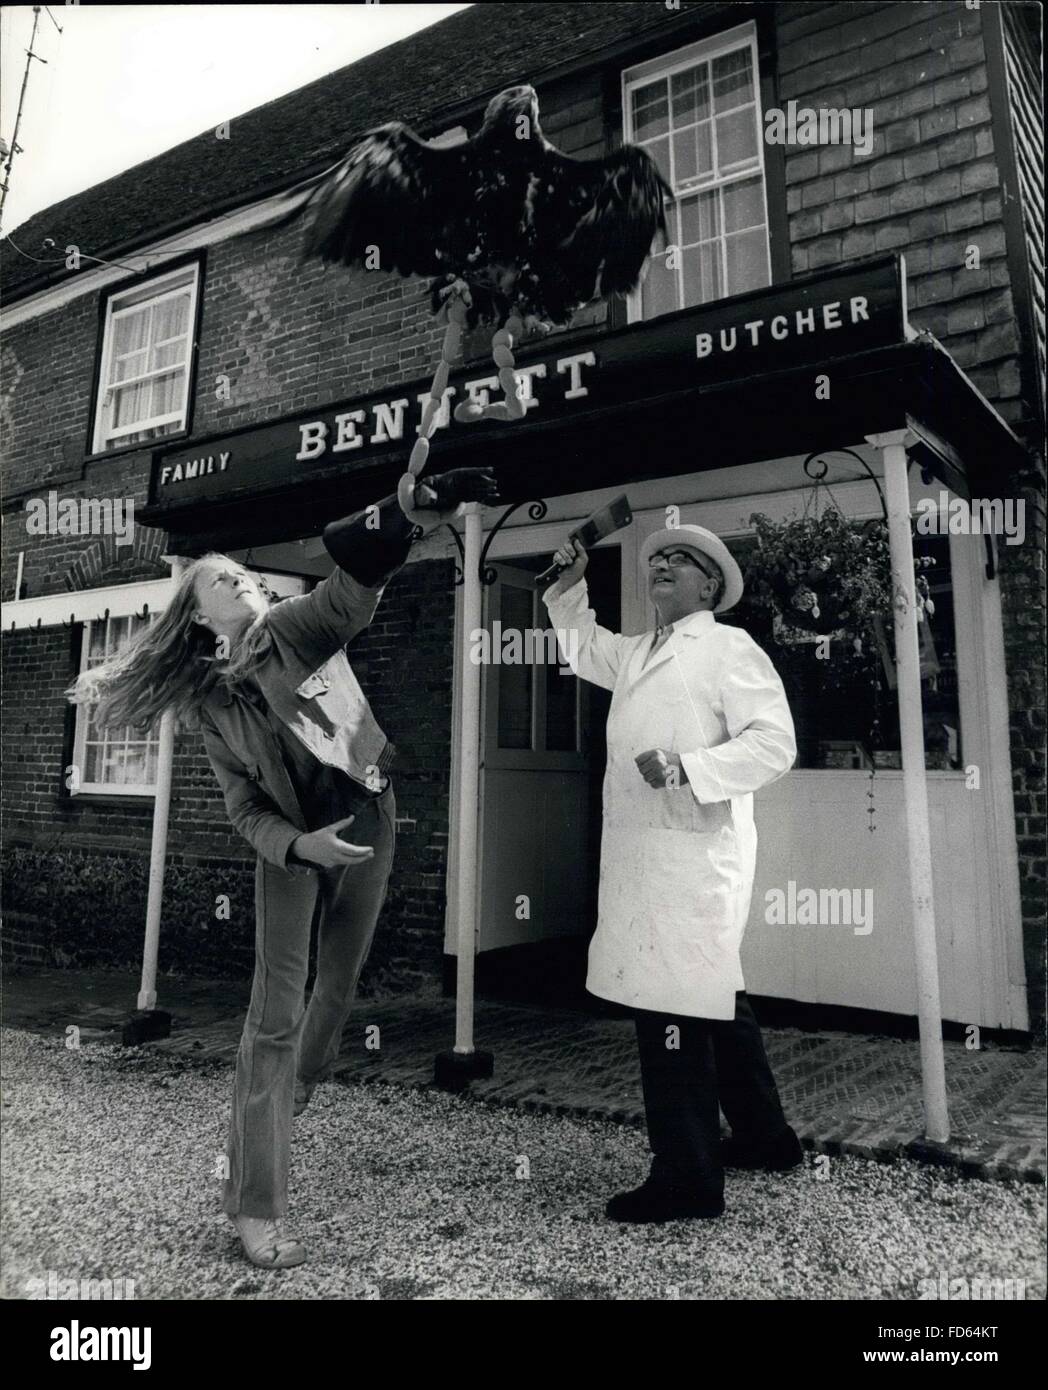 1962 - stop that eagle: Bugsy, the imperial eagle from chilham castle, Kent, certainly knows what he likes when he goes out shopping with Linda Poole. one of the assistant falconers from the castle. The price of bangers (sausages) is continuing to rise but never so fast as when Bugay's eagle eye spotted them in the shop of the local butcher, Mr. Bennett. © Keystone Pictures USA/ZUMAPRESS.com/Alamy Live News Stock Photo